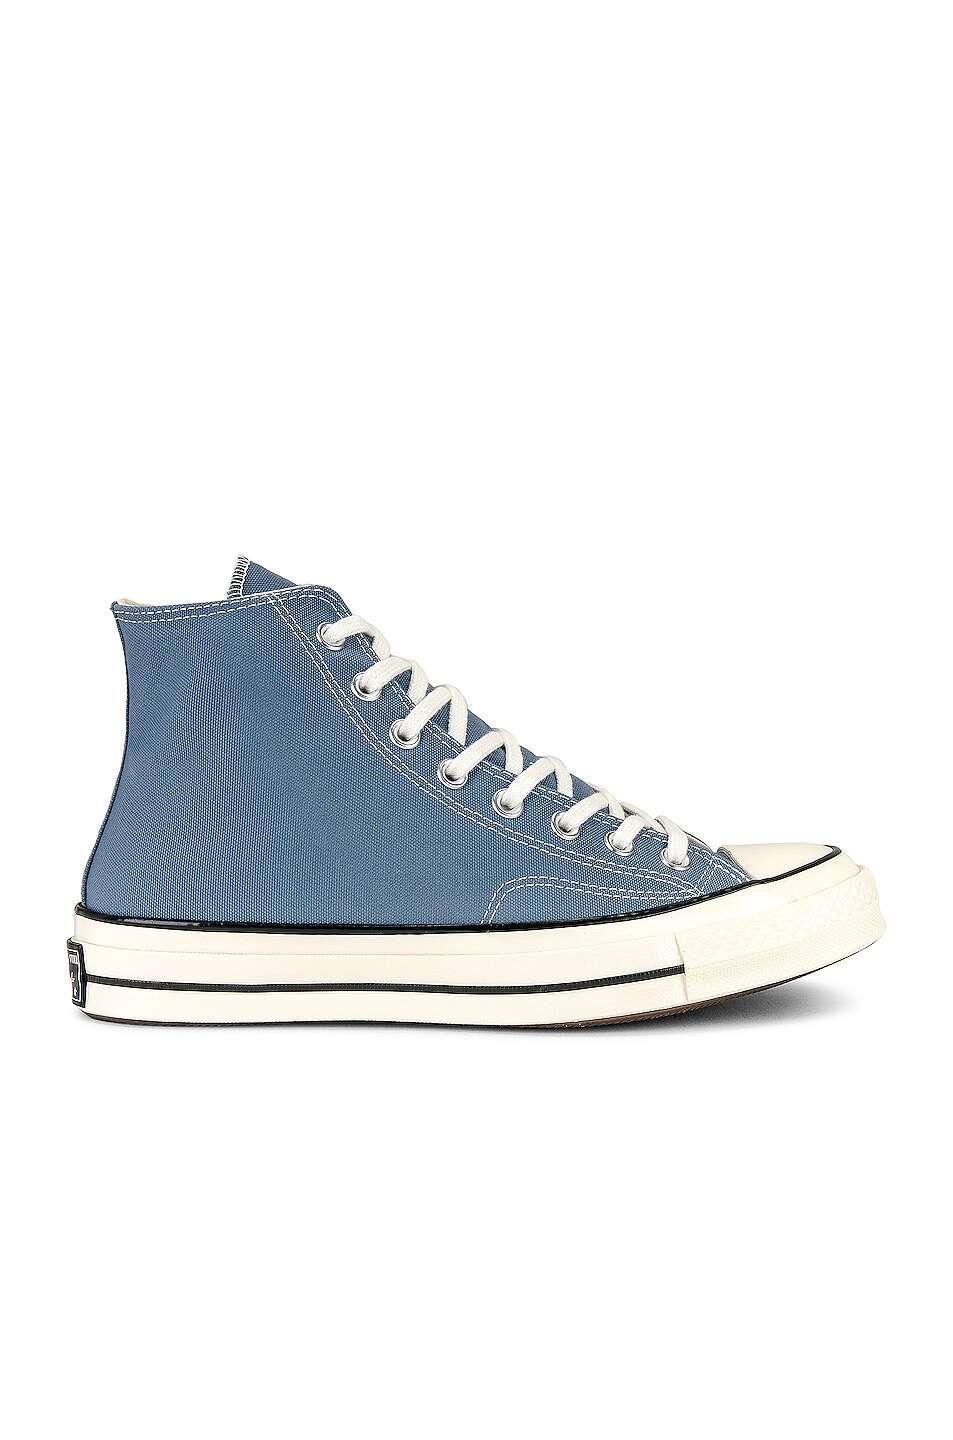 Image 1 of Converse Chuck 70 Recycled Canvas Hi in Indigo Oxide, Egret, & Black